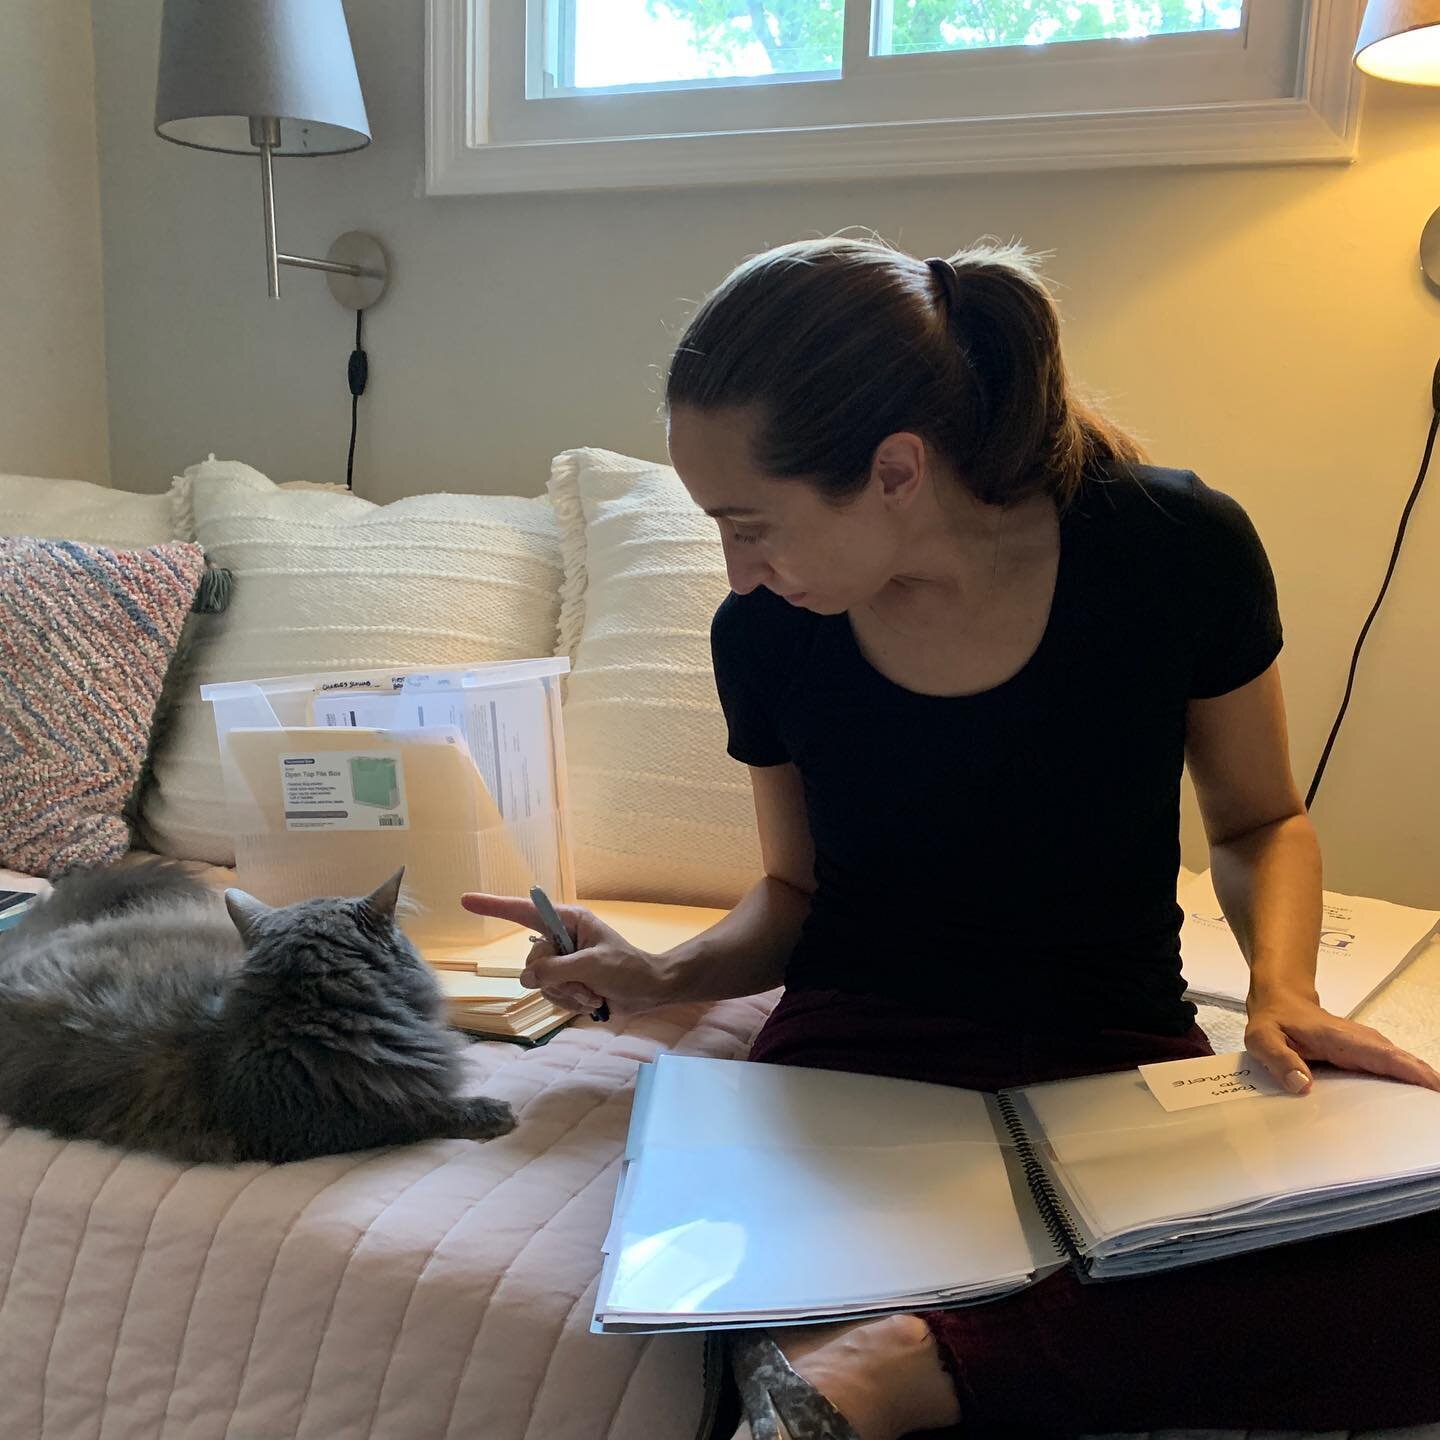 I ❤️ organizing paper and I ❤️ cats and sometimes the two come together! My client today was a fellow #crazycatlady and captured this precious moment. 

#organizing#napopro#silverspring#decluttering#decluttering#paperorganization#paperorganizing